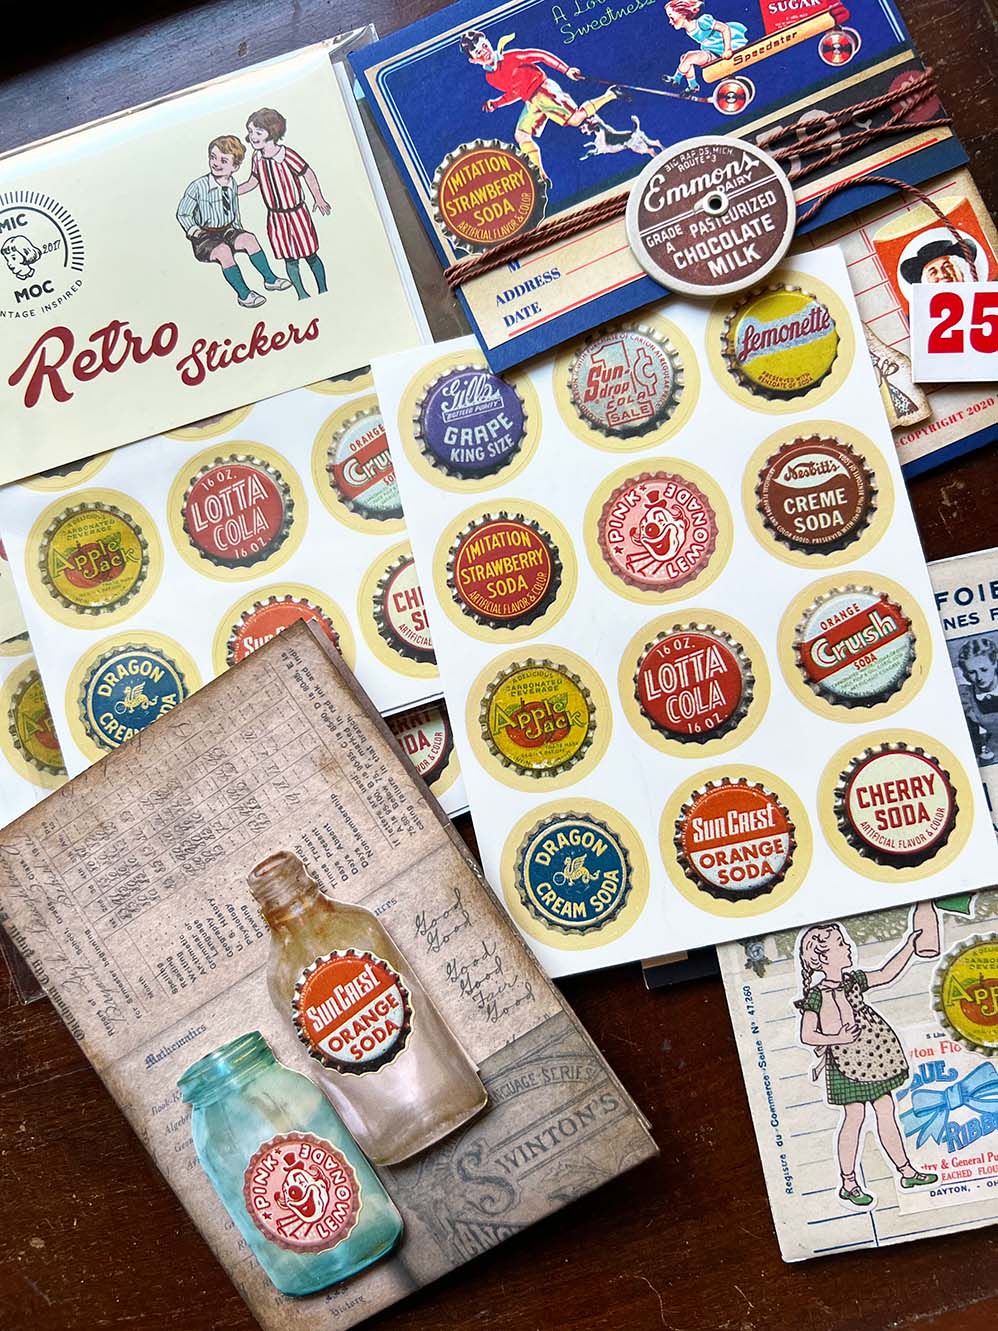 Vintage Soda Bottle Caps' A6 Retro Stickers by Mic Moc (24 stickers)  センステッカー紙 from  at Mic Moc Curated Emporium